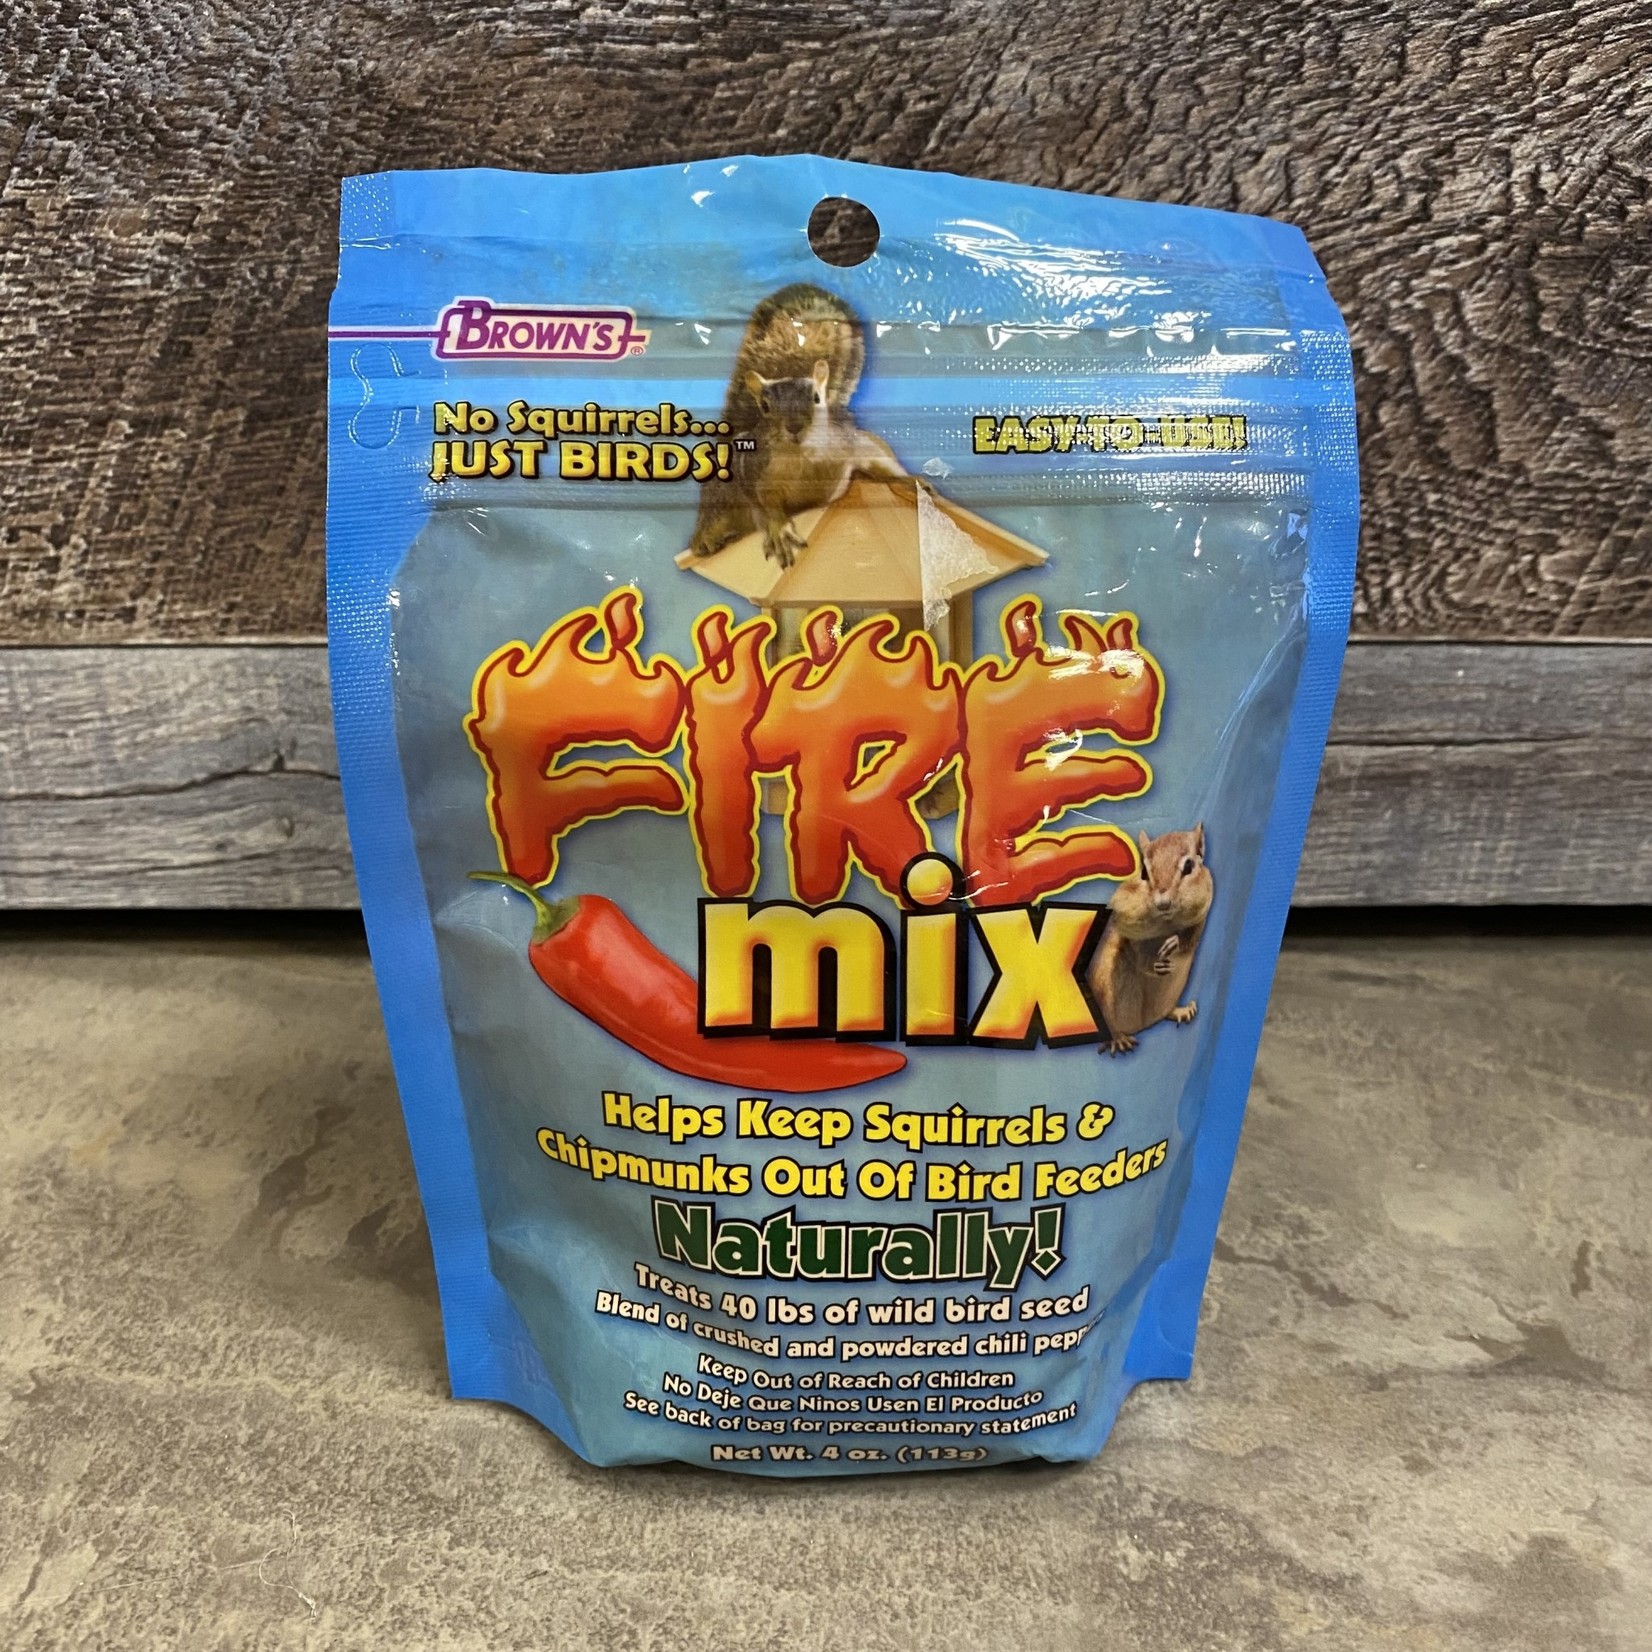 Squirrel Fire Mix Package - 4 oz